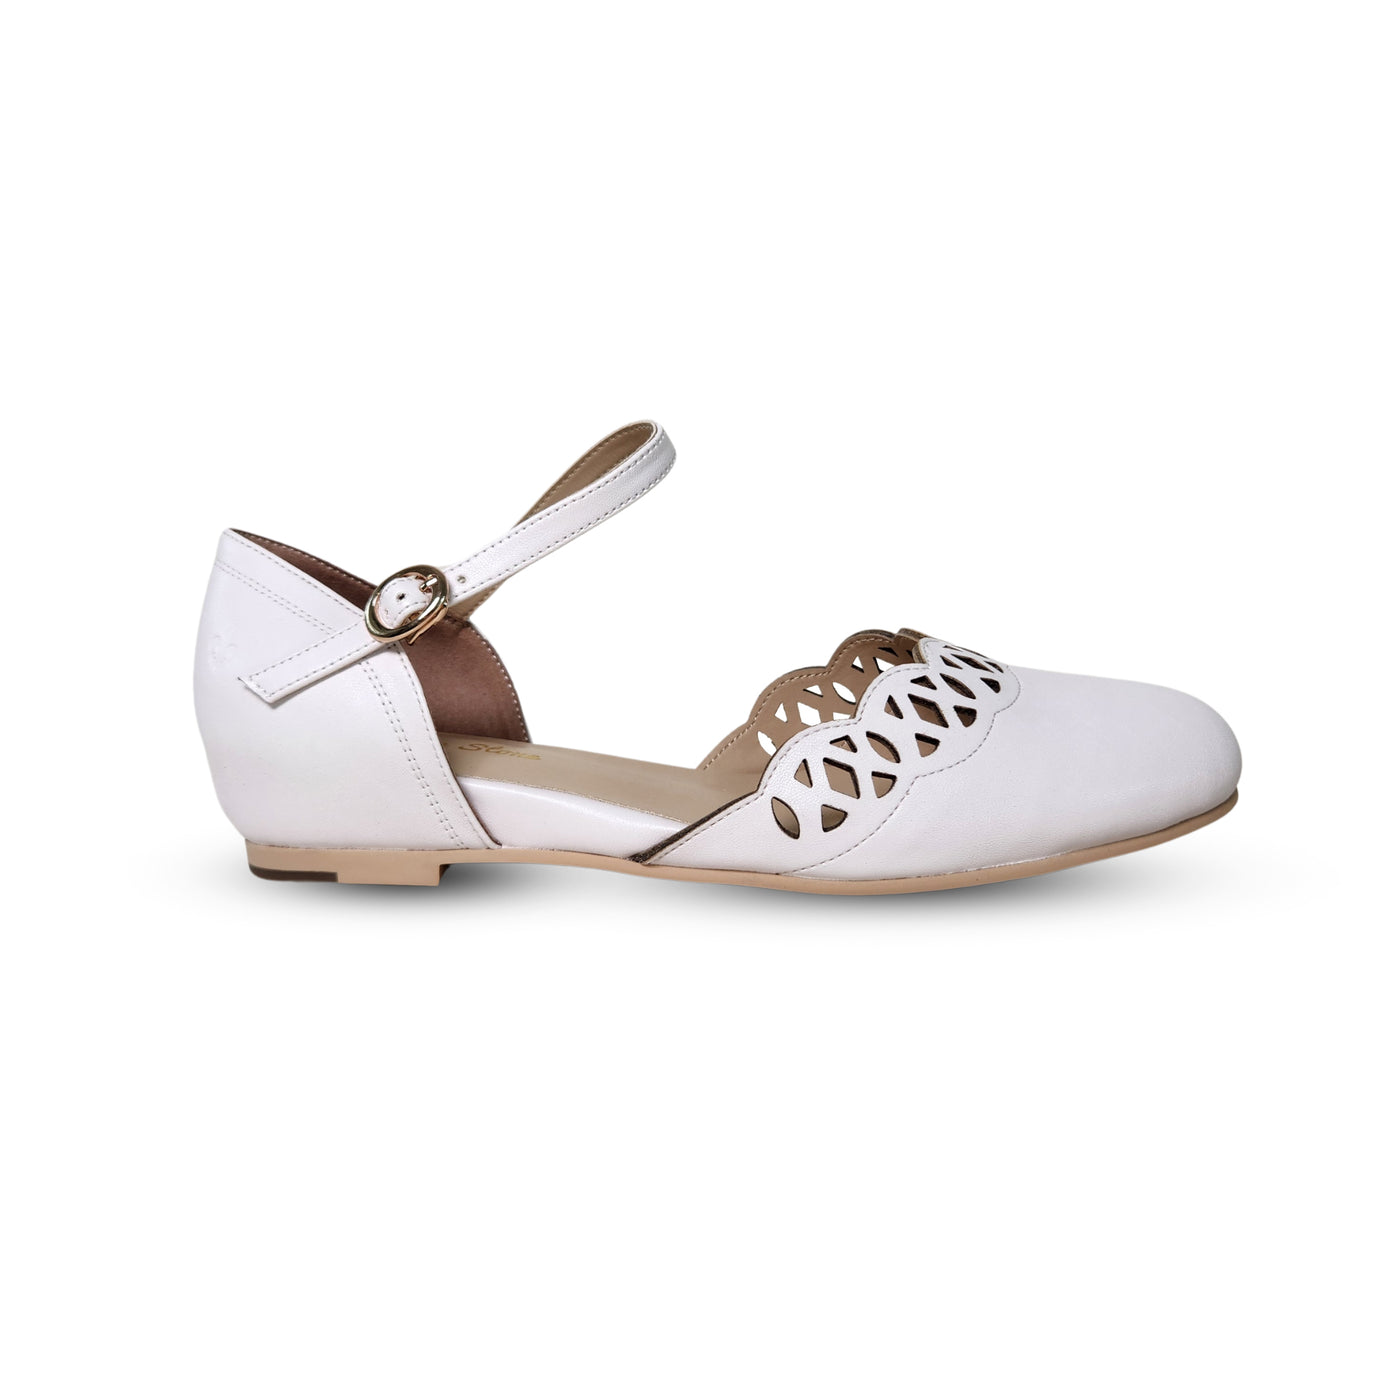 Charlie Stone Shoes vintage 1940s 1950s flats inspired by retro heels vegan friendly and comfortable